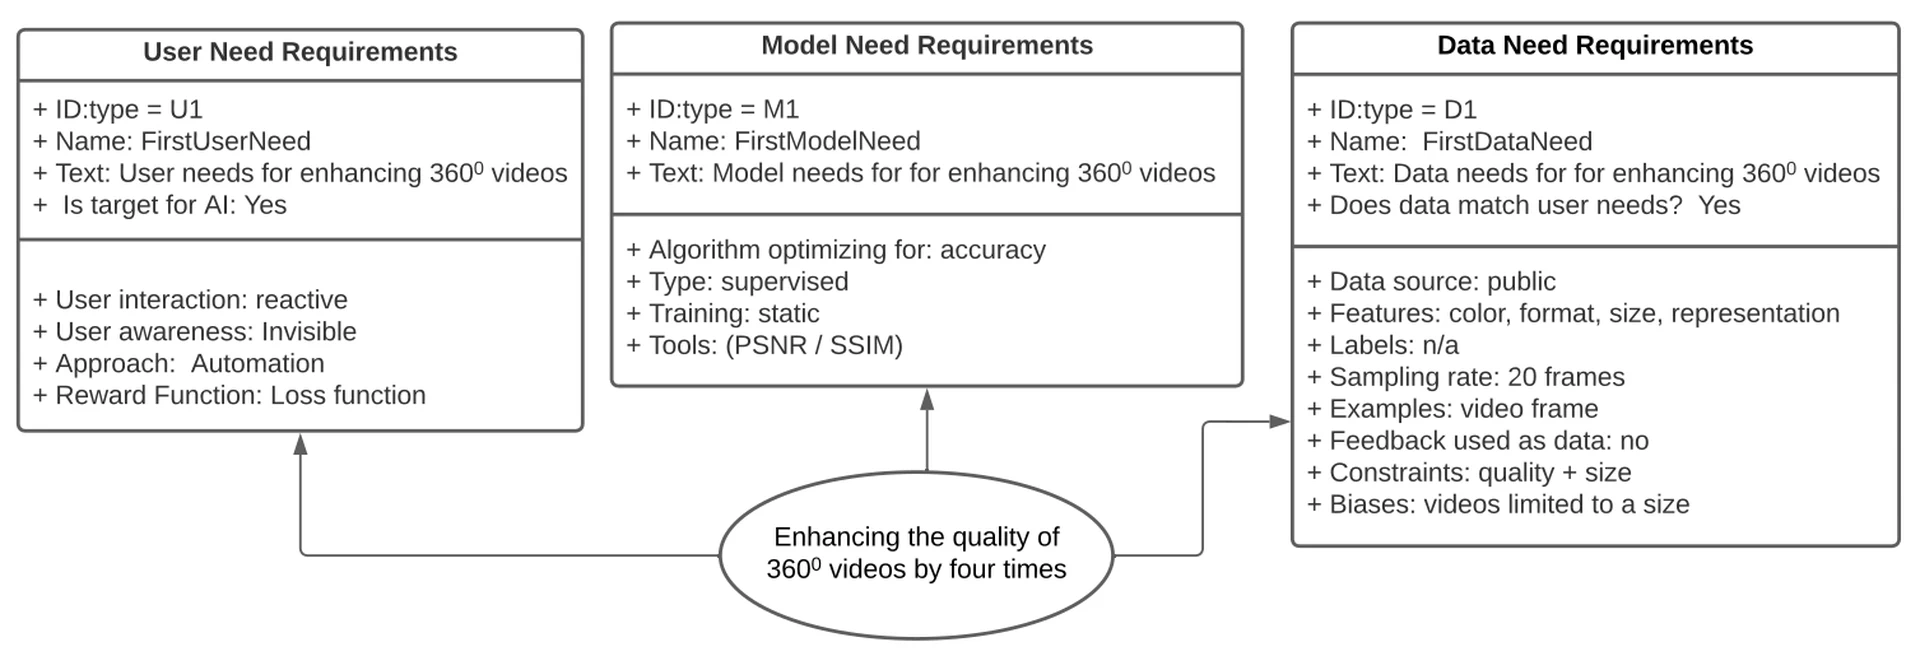 Model presenting the holistic view of the requirements elicited for enhancing the quality of 360°video.